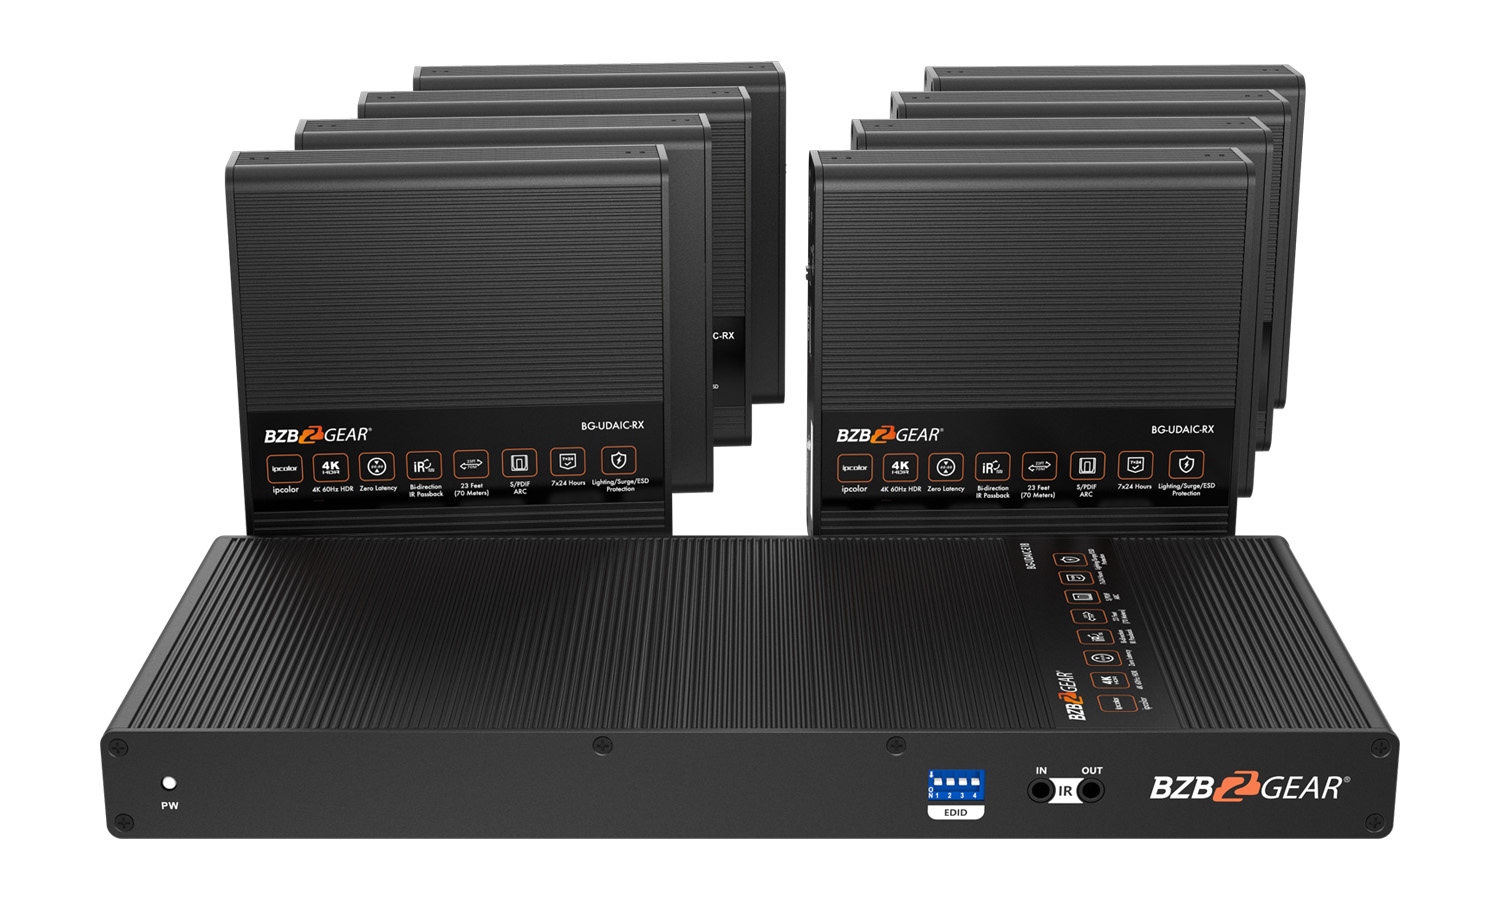 BG-UDAIC-E18 1x8 4K UHD HDMI Splitter/Distribution Amplifier up to 230ft over Category Cable with IR/RS232 and Audio De-embedding by BZBGEAR